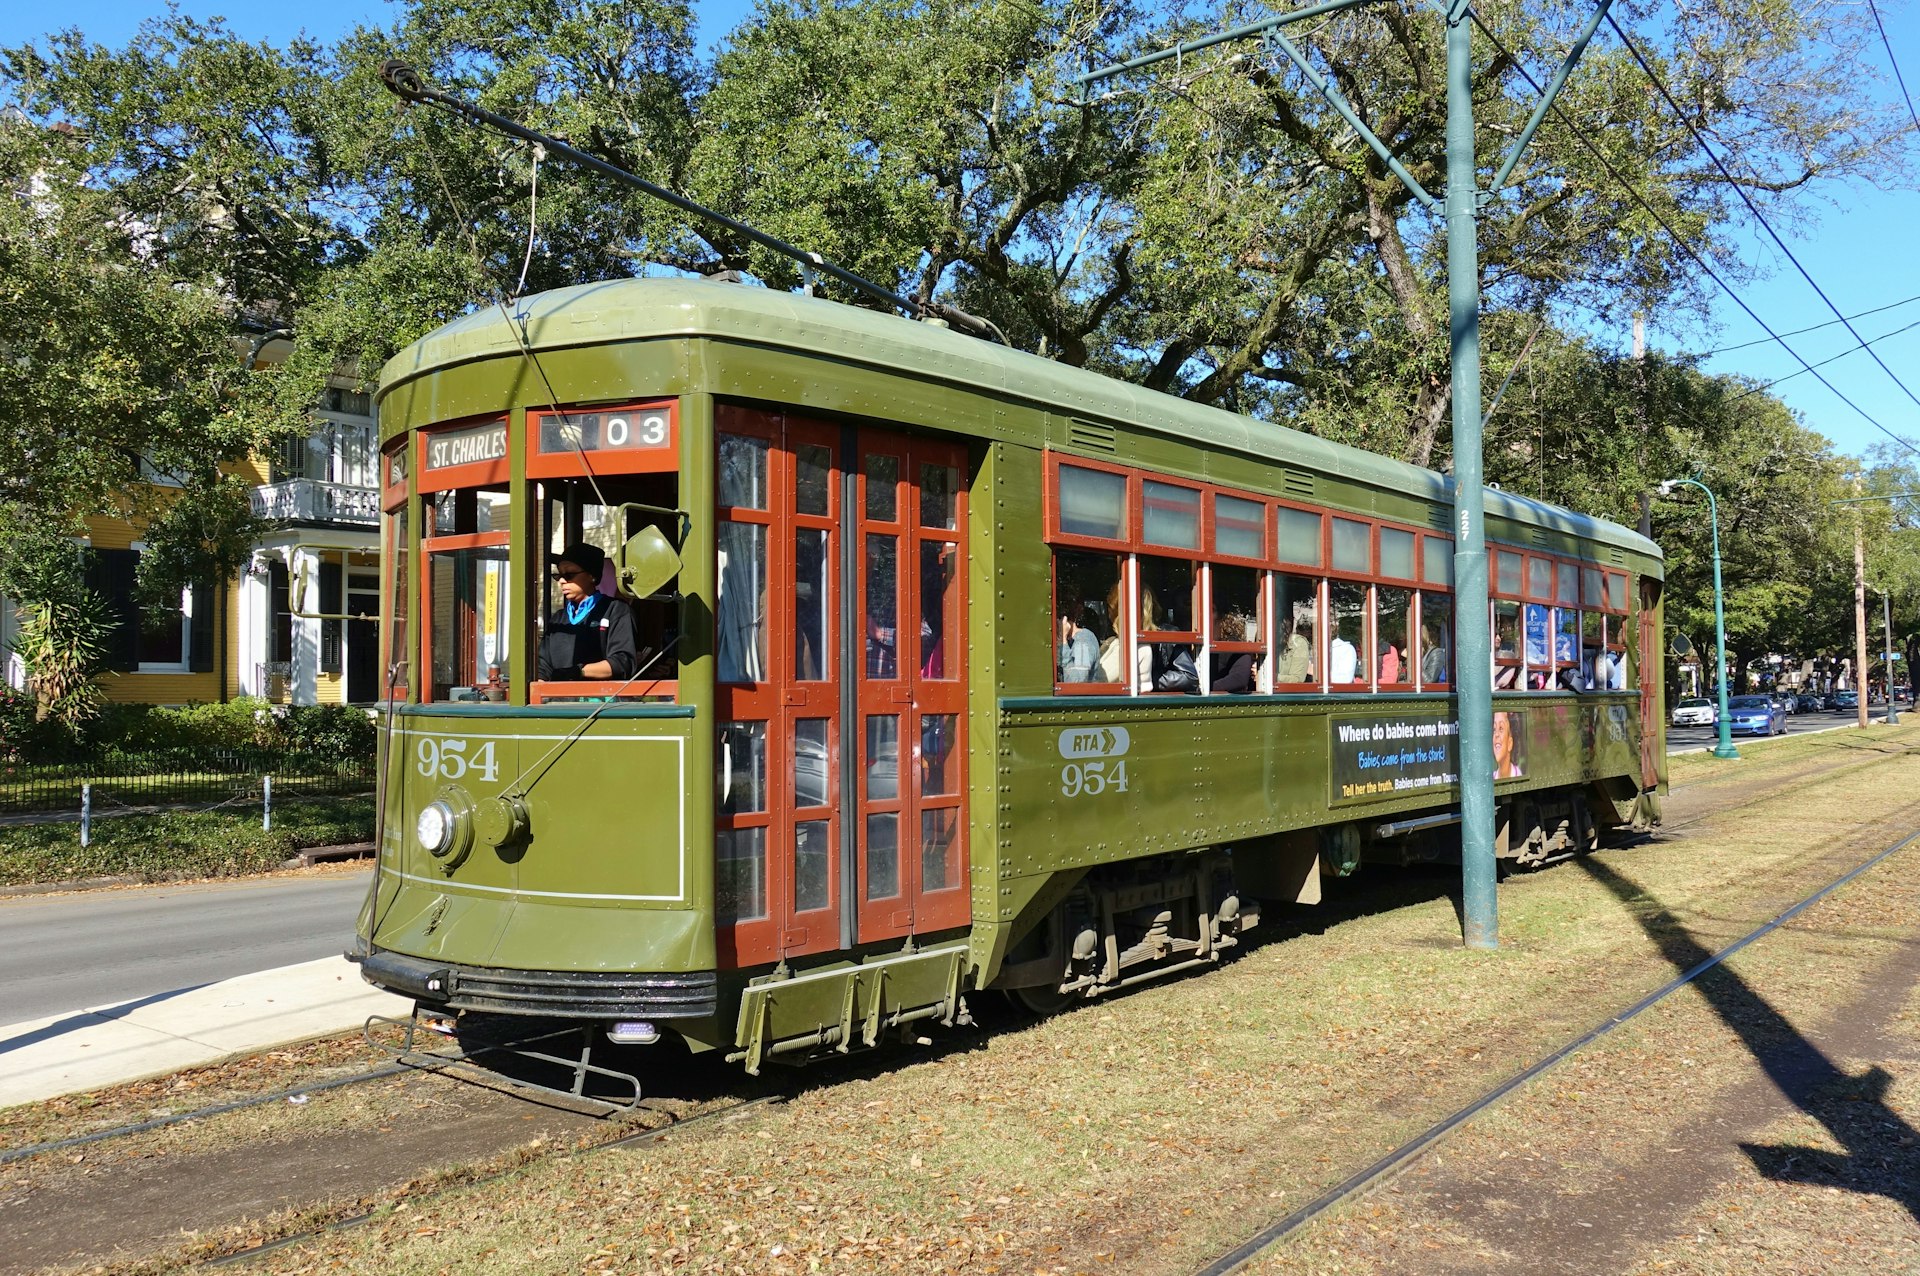 An old streetcar in New Orleans, which has the oldest continuously operating street railway system in the world